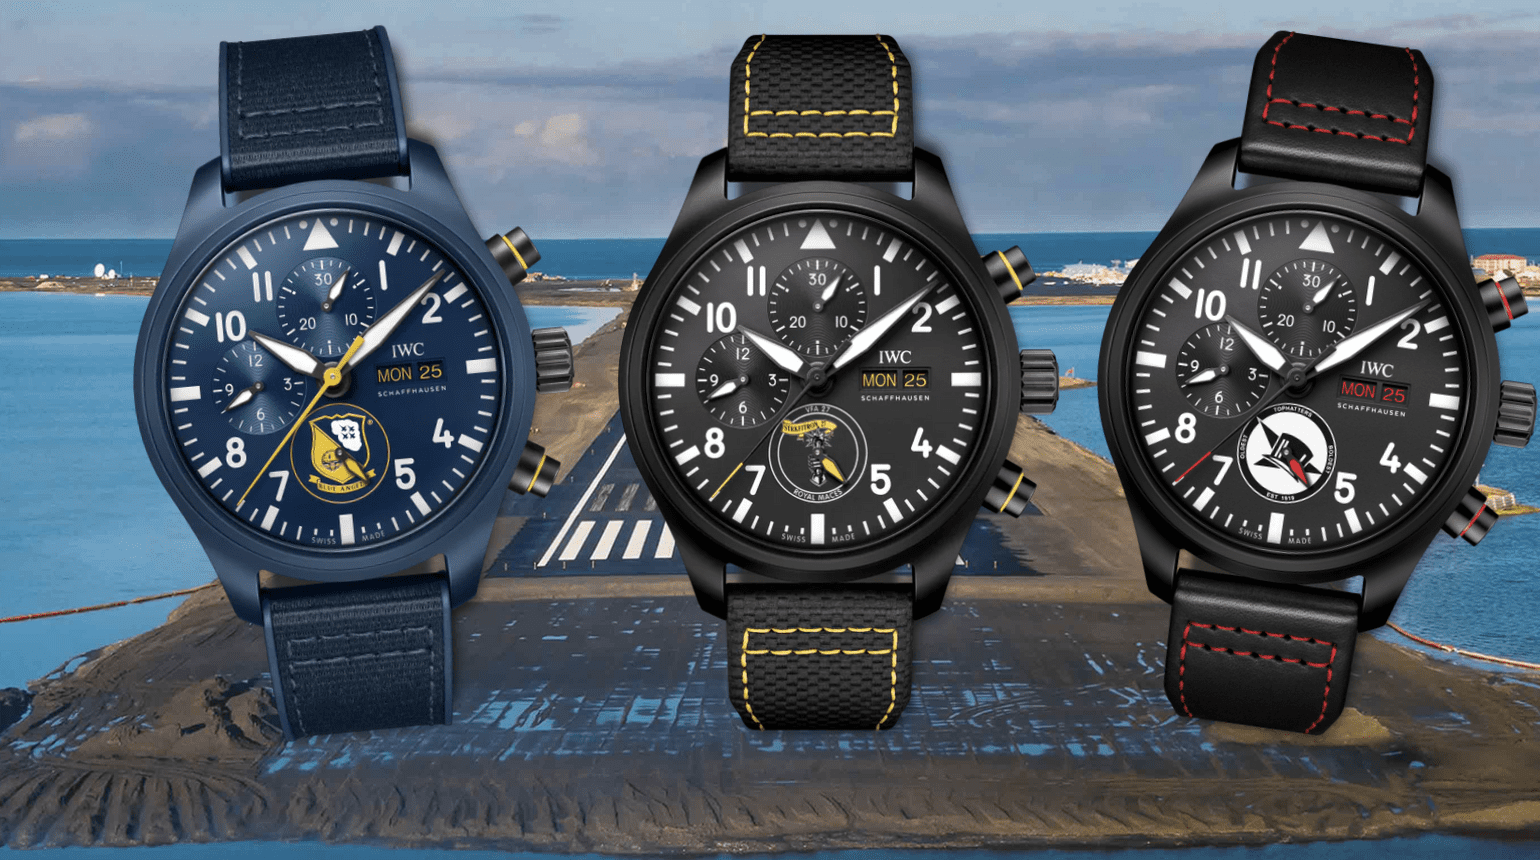 VIDEO: The IWC Pilot’s Watch Limited Edition collection celebrates the real Top Guns